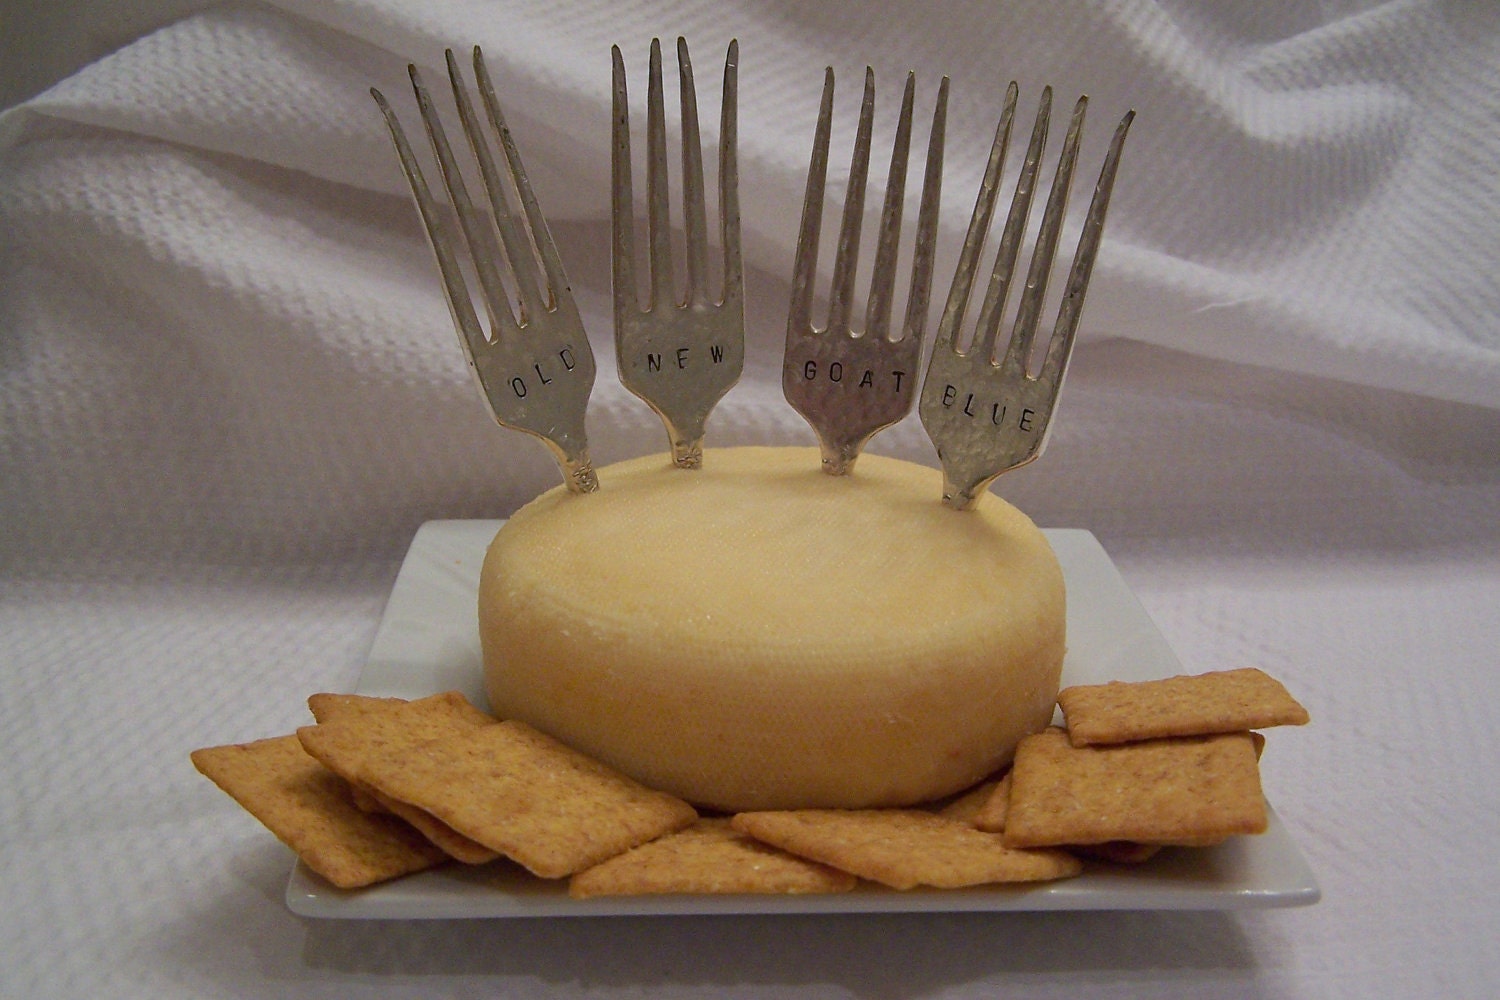 Cheese Markers - Old - New - Goat - Blue - Hostess Gift - Hand Stamped - Hand Hammered - Vintage Silverplate - Gift Basket - Under 20